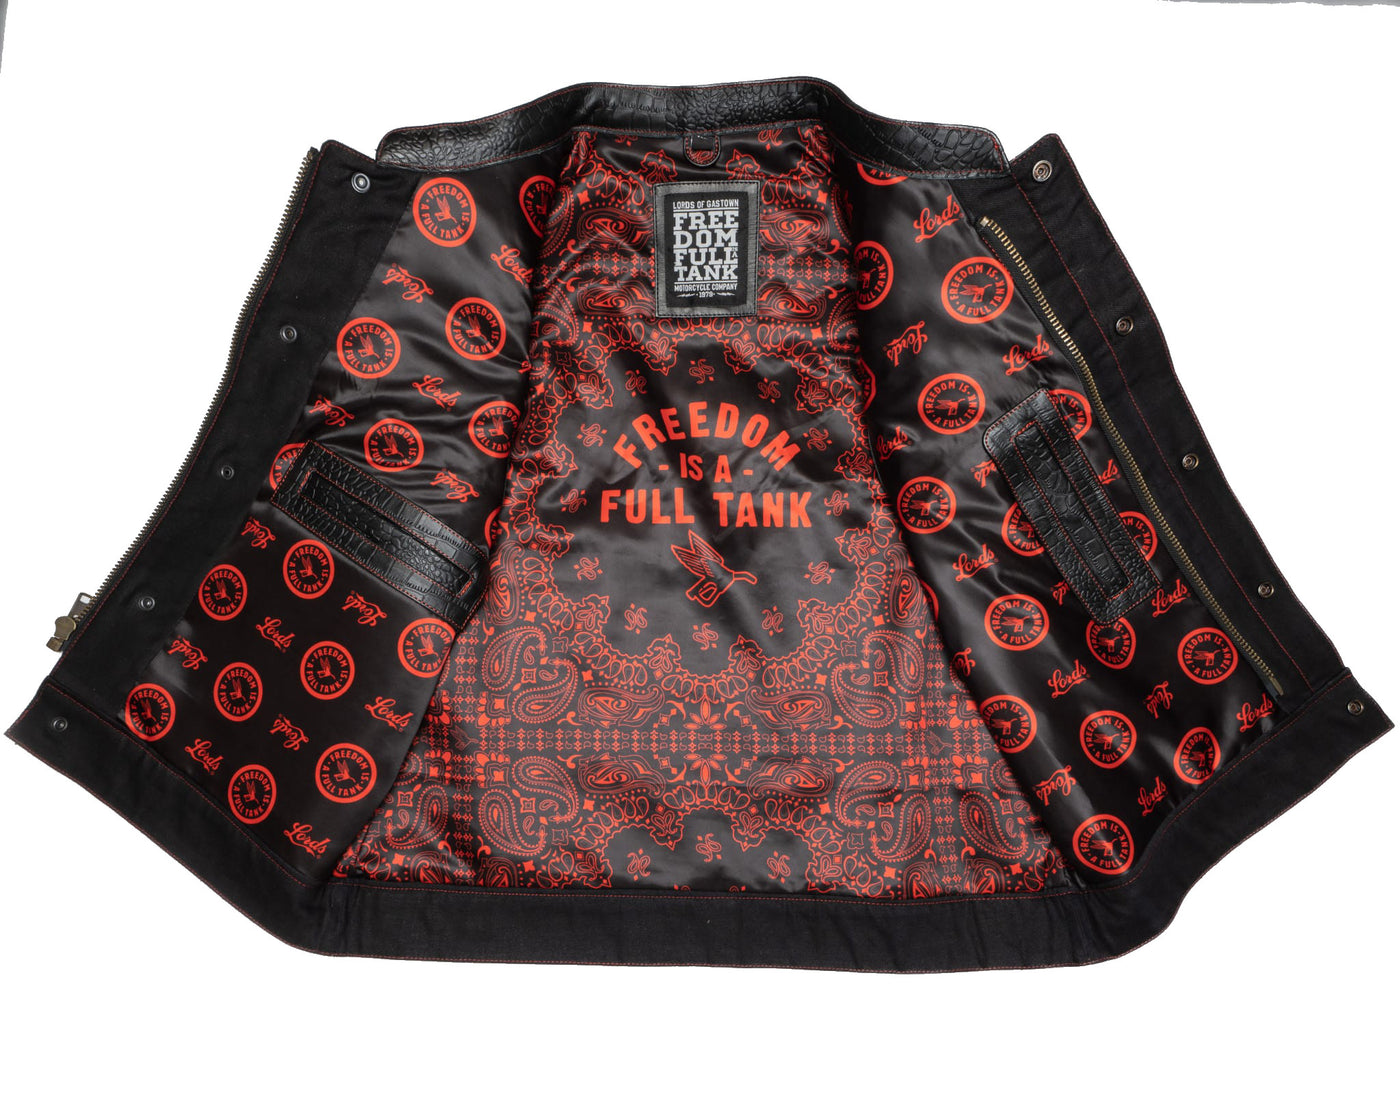 Lords x Freedom Is A Full Tank Moto Vest - Crocodile Leather